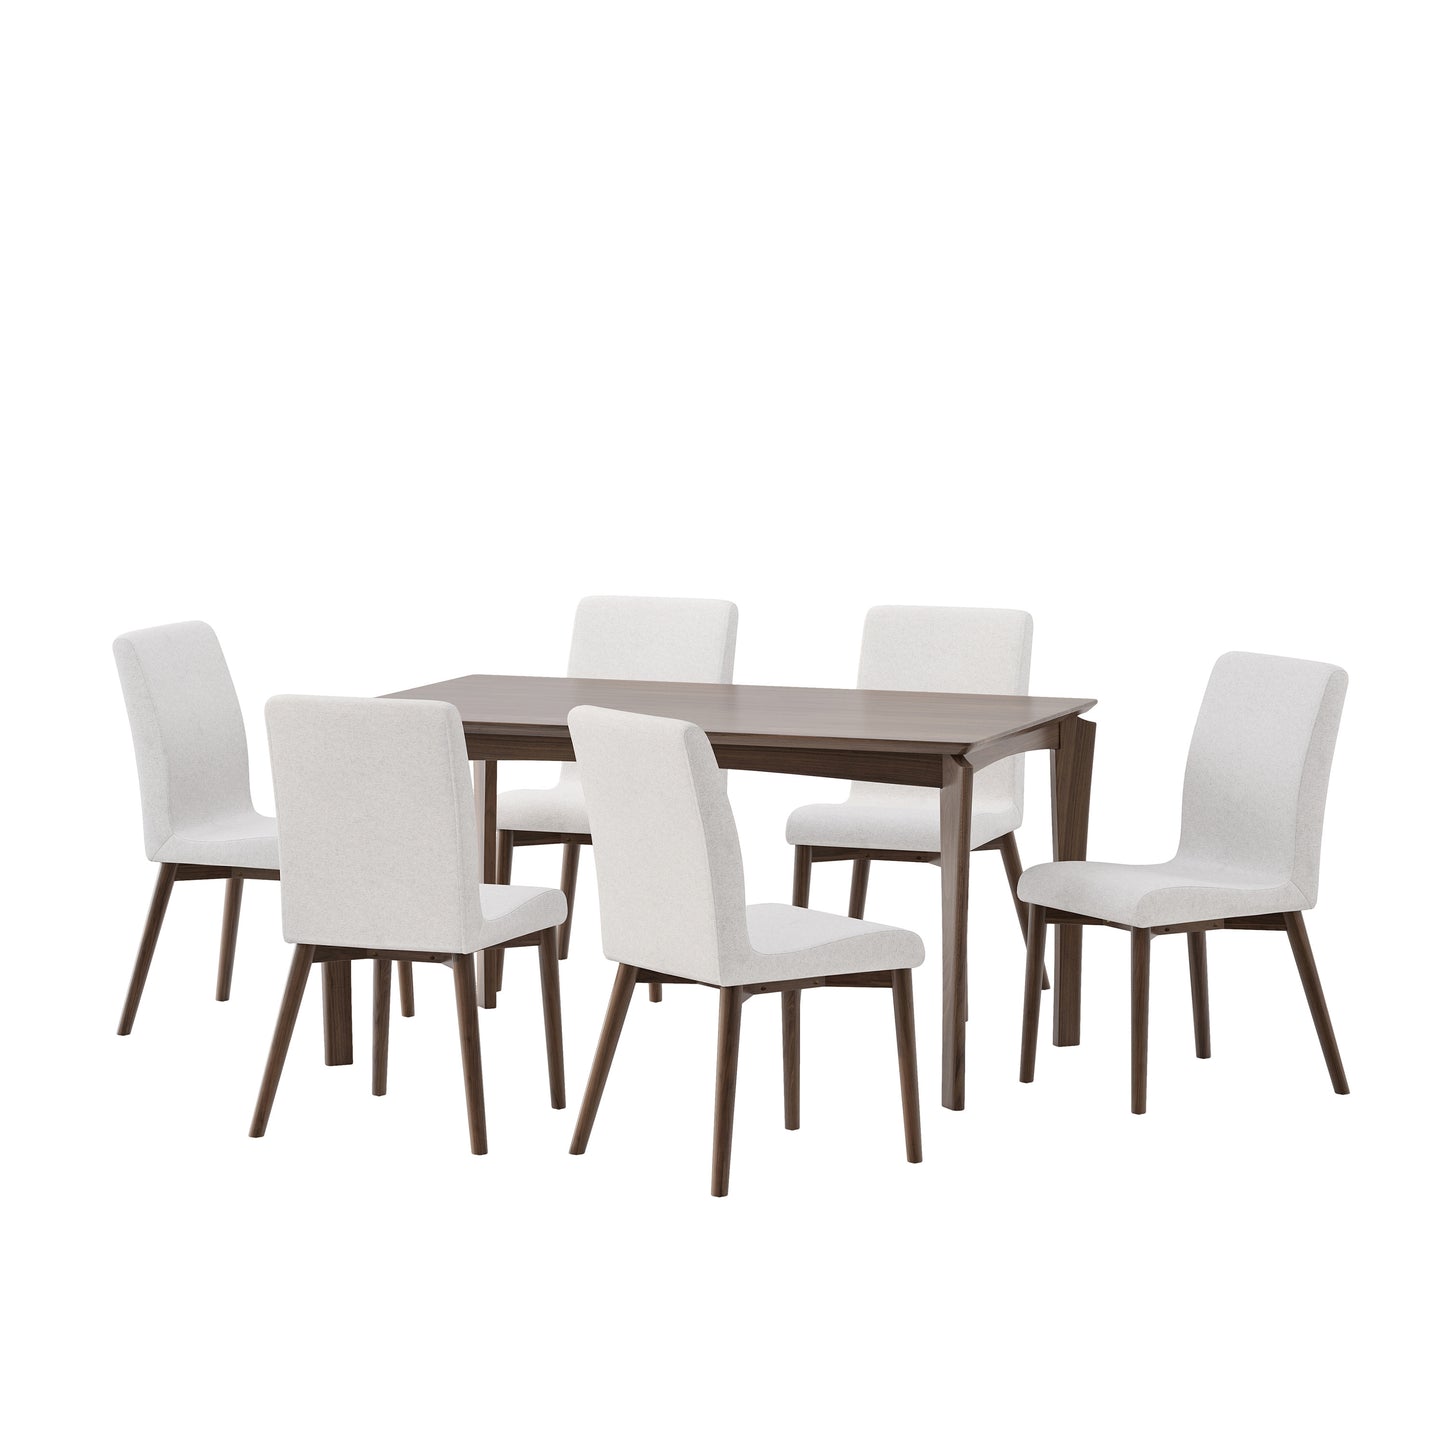 Amesbury Wood and Fabric 7 Piece Dining Set